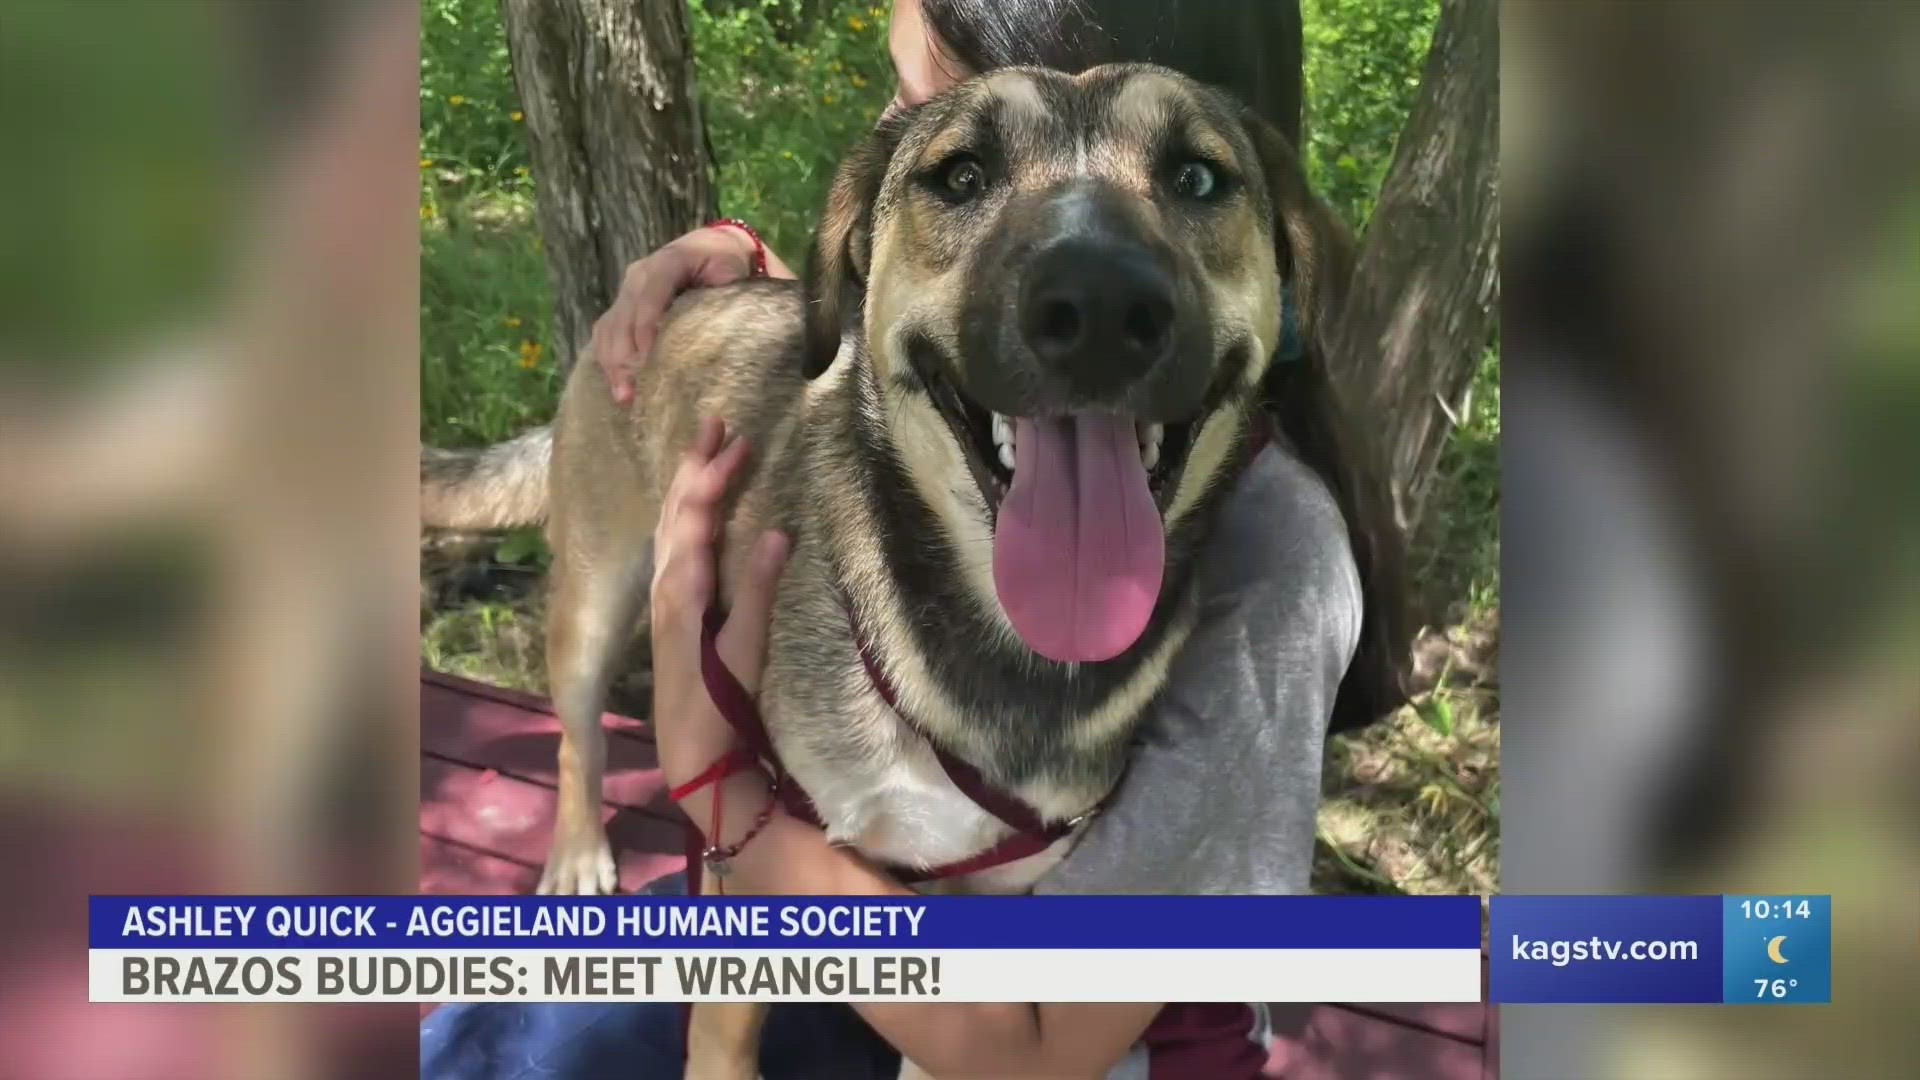 This week's Brazos Buddy is Wrangler, a one-and-a-half year old Shepherd-Hound mix that's looking to be adopted.